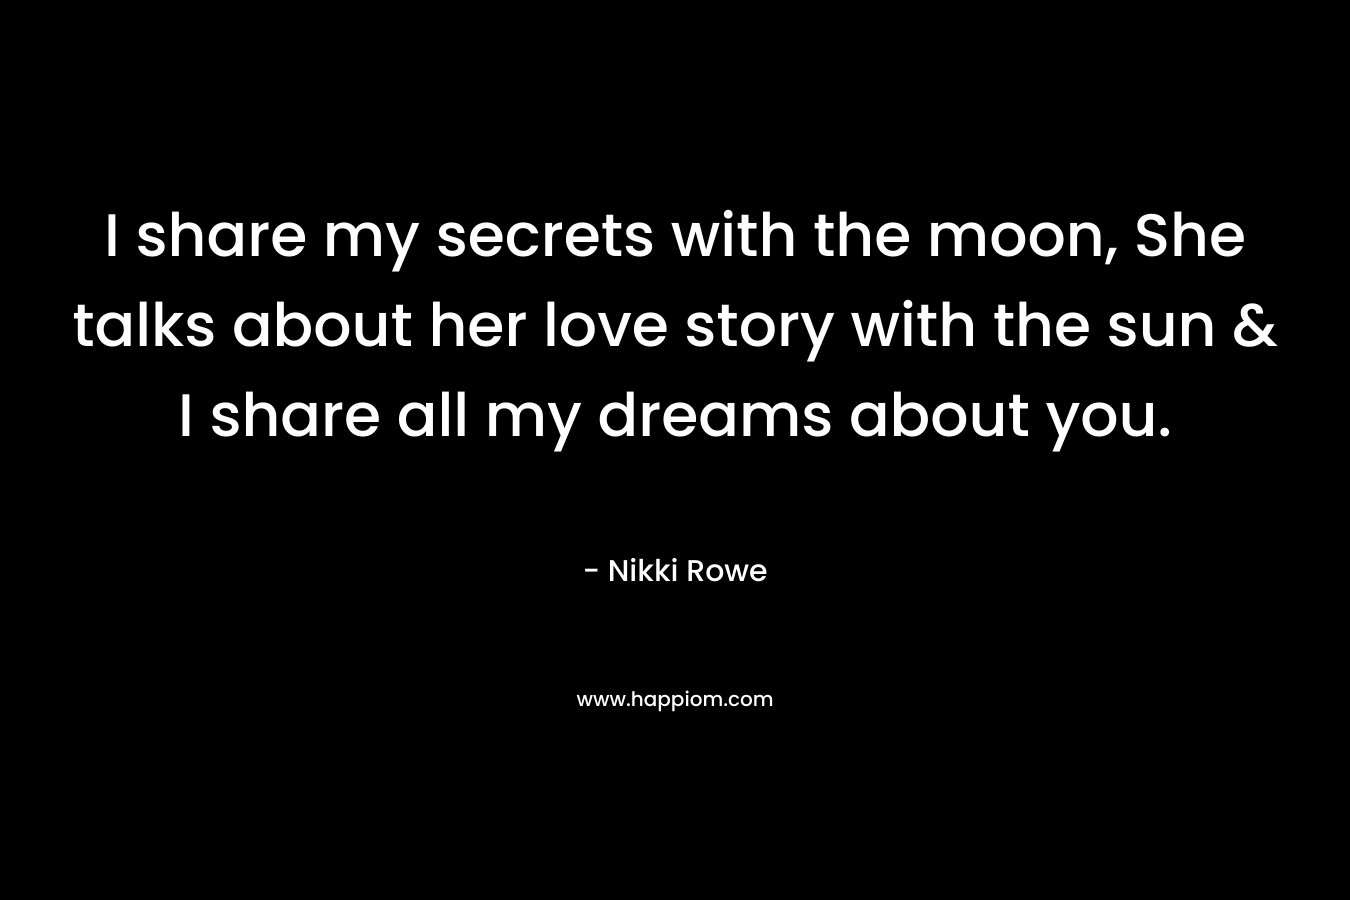 I share my secrets with the moon, She talks about her love story with the sun & I share all my dreams about you.